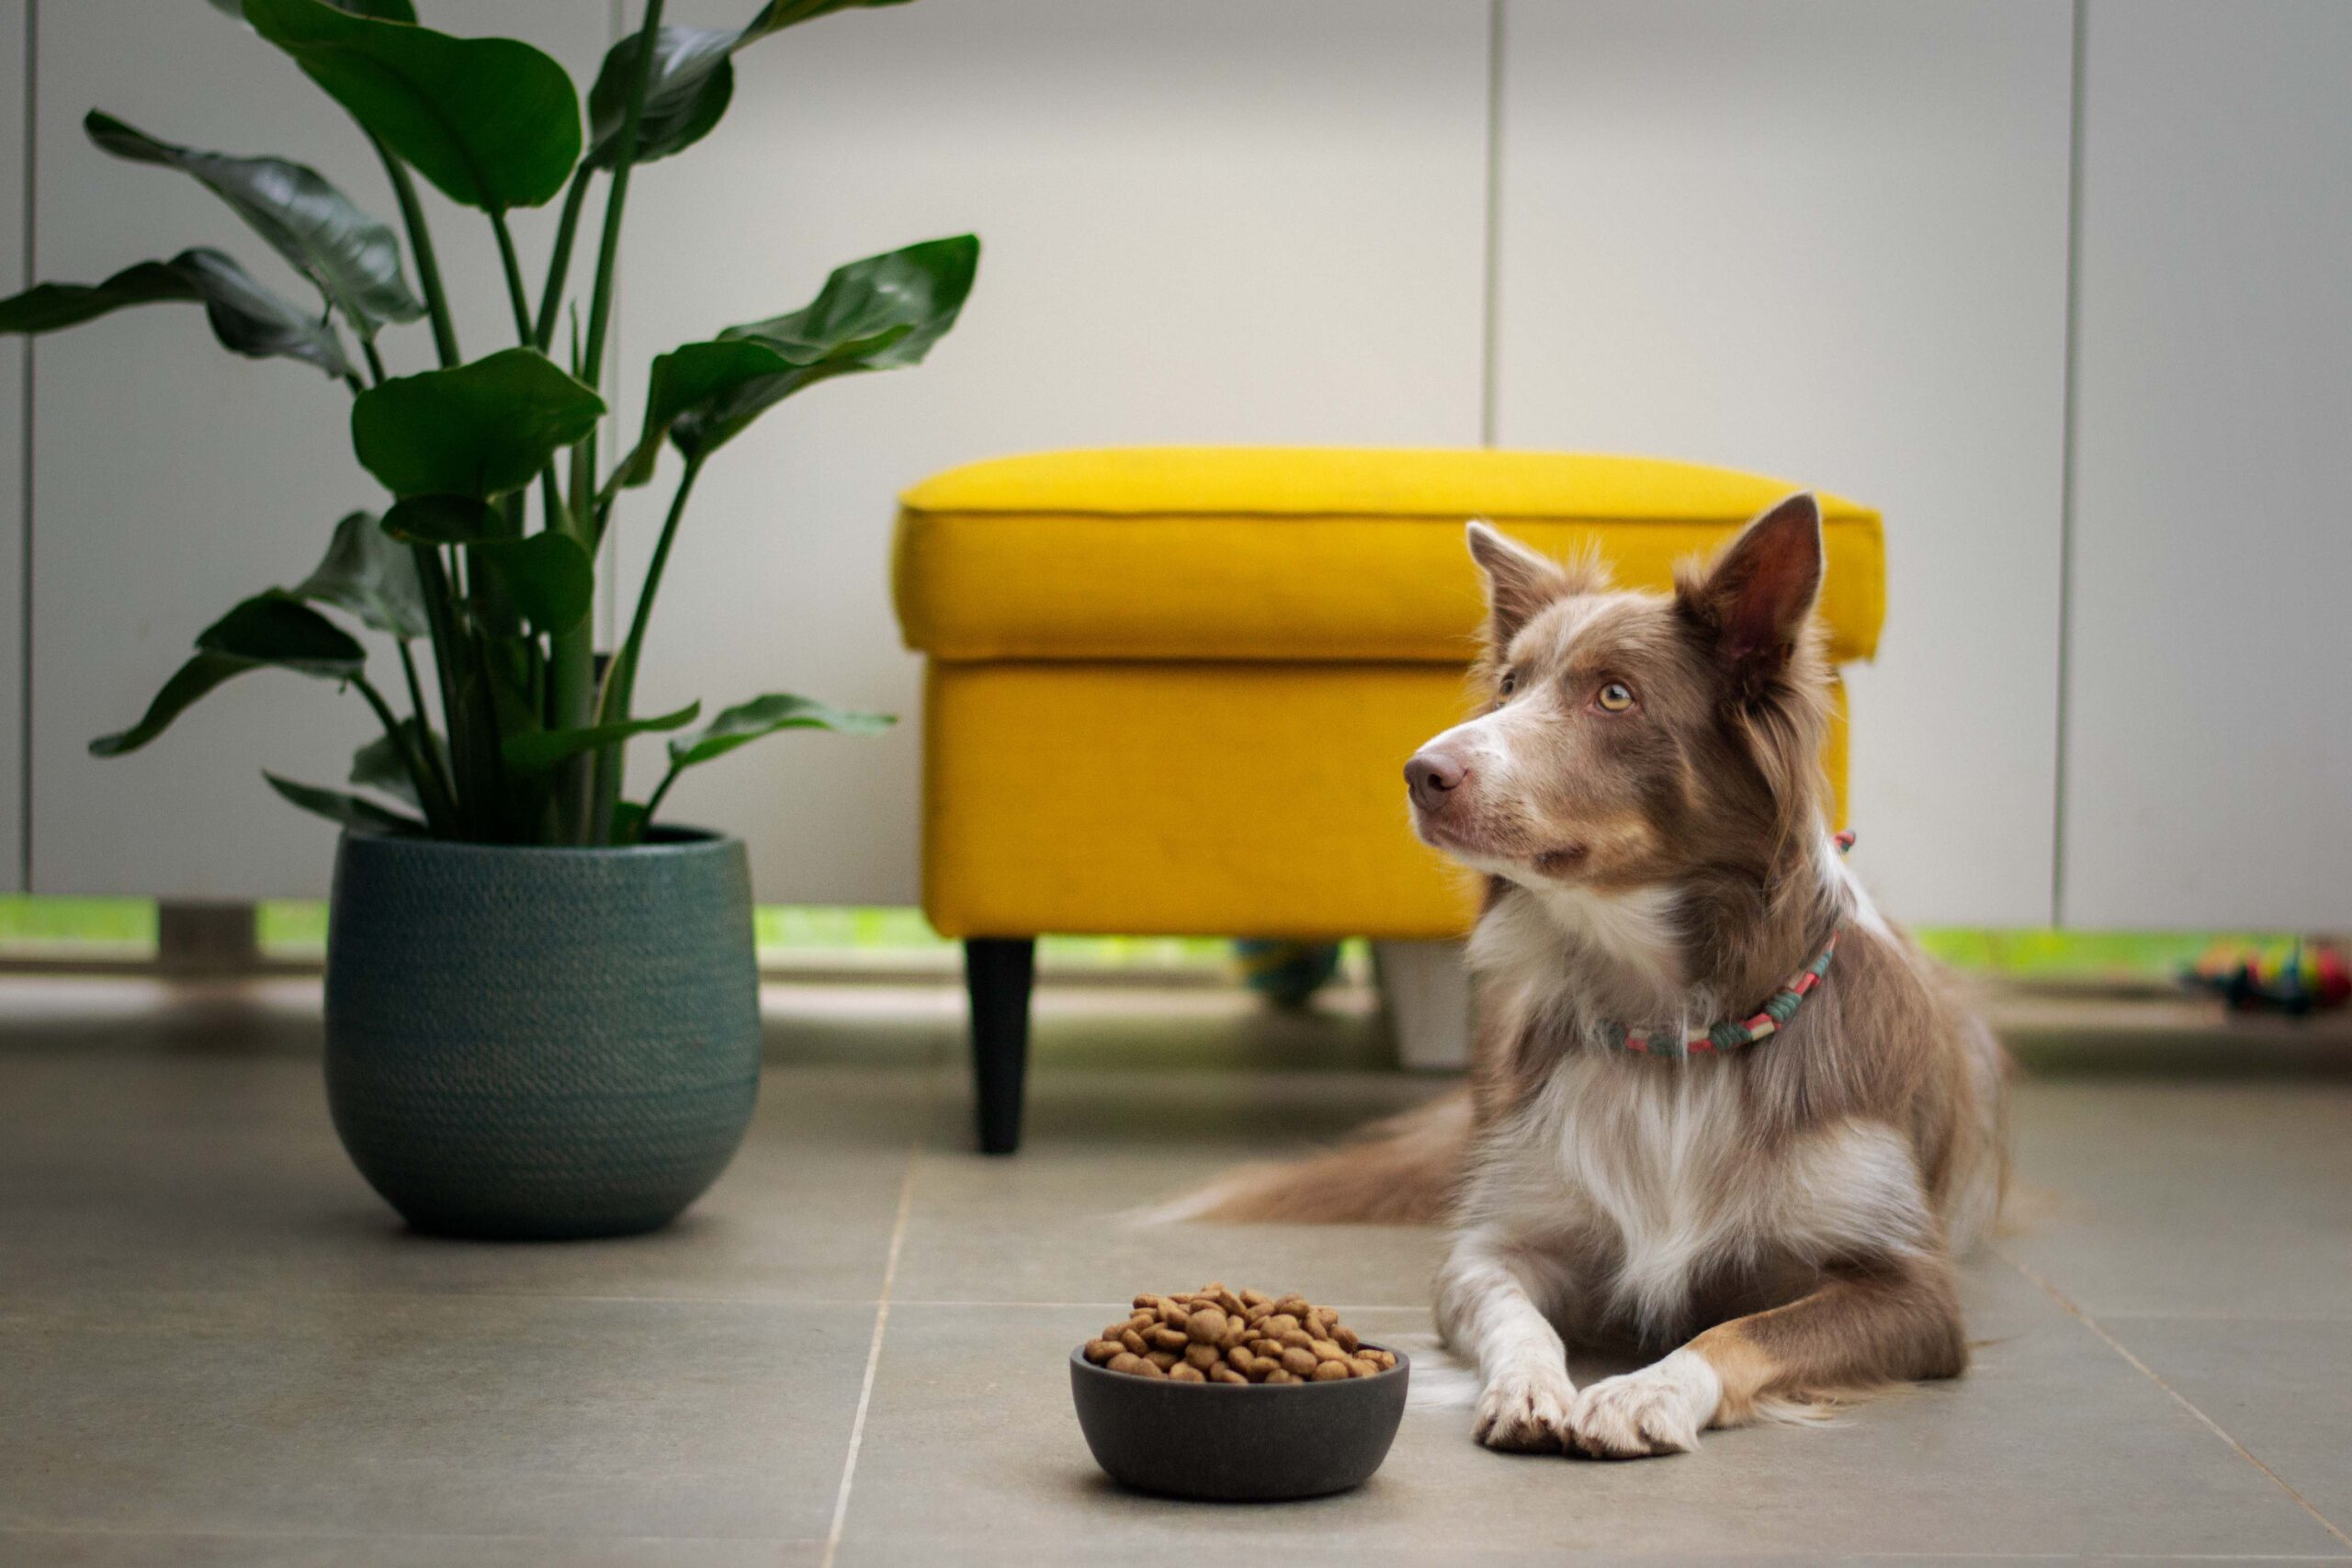 A calm collie type dog is laying beside a bowl piled high with dry dog food biscuits. He is attentive to something outside the photo. In the background is a green leafy plant and a yellow footstool.